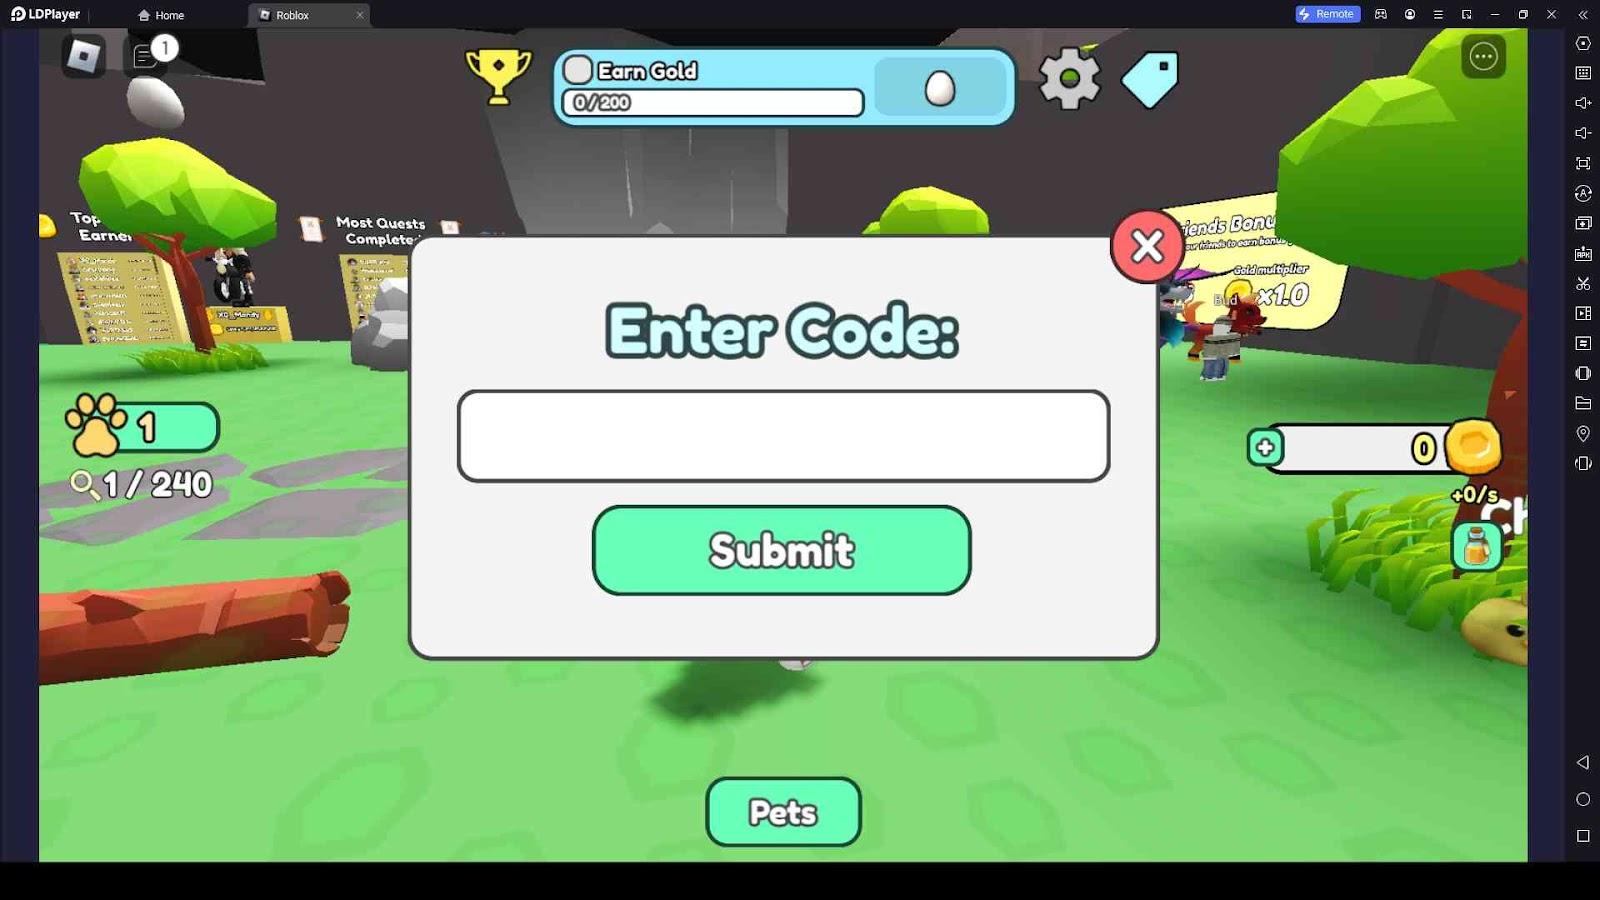 Roblox Collect All Pets codes for free gold boost (December 2023)